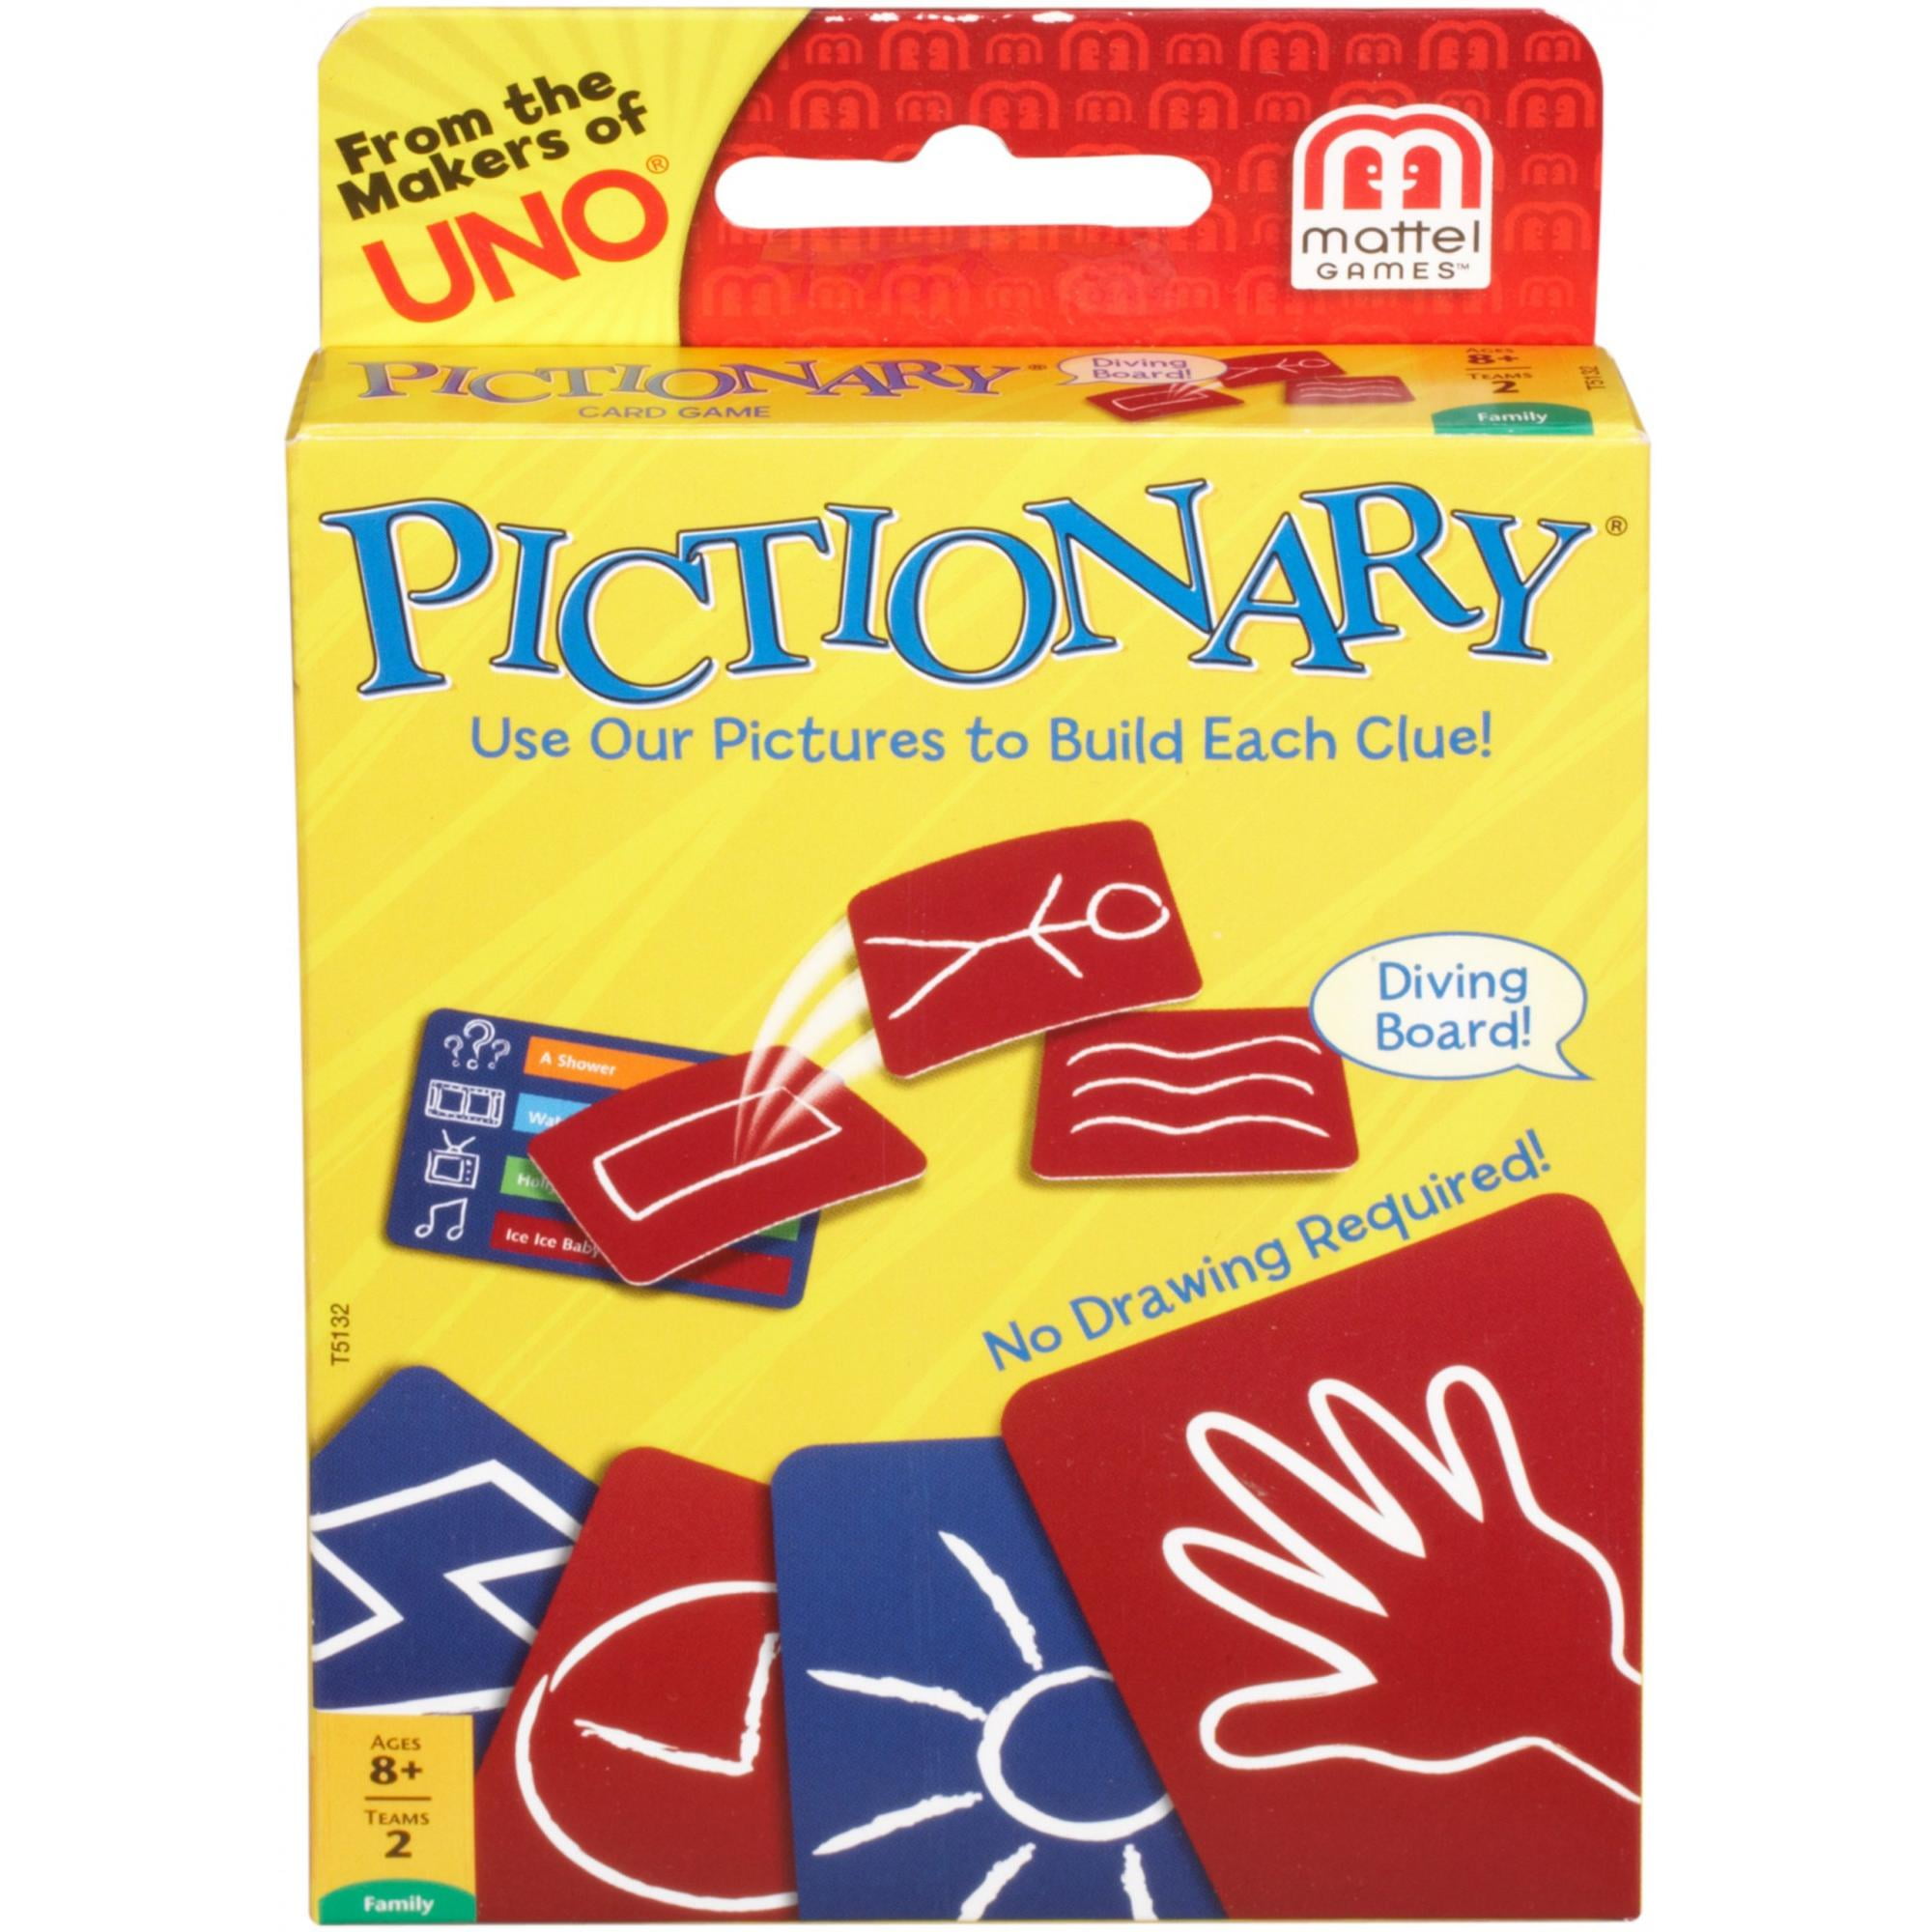 Pictionary First Edition Game Tokens Category Cards Dice Timer ONLY 